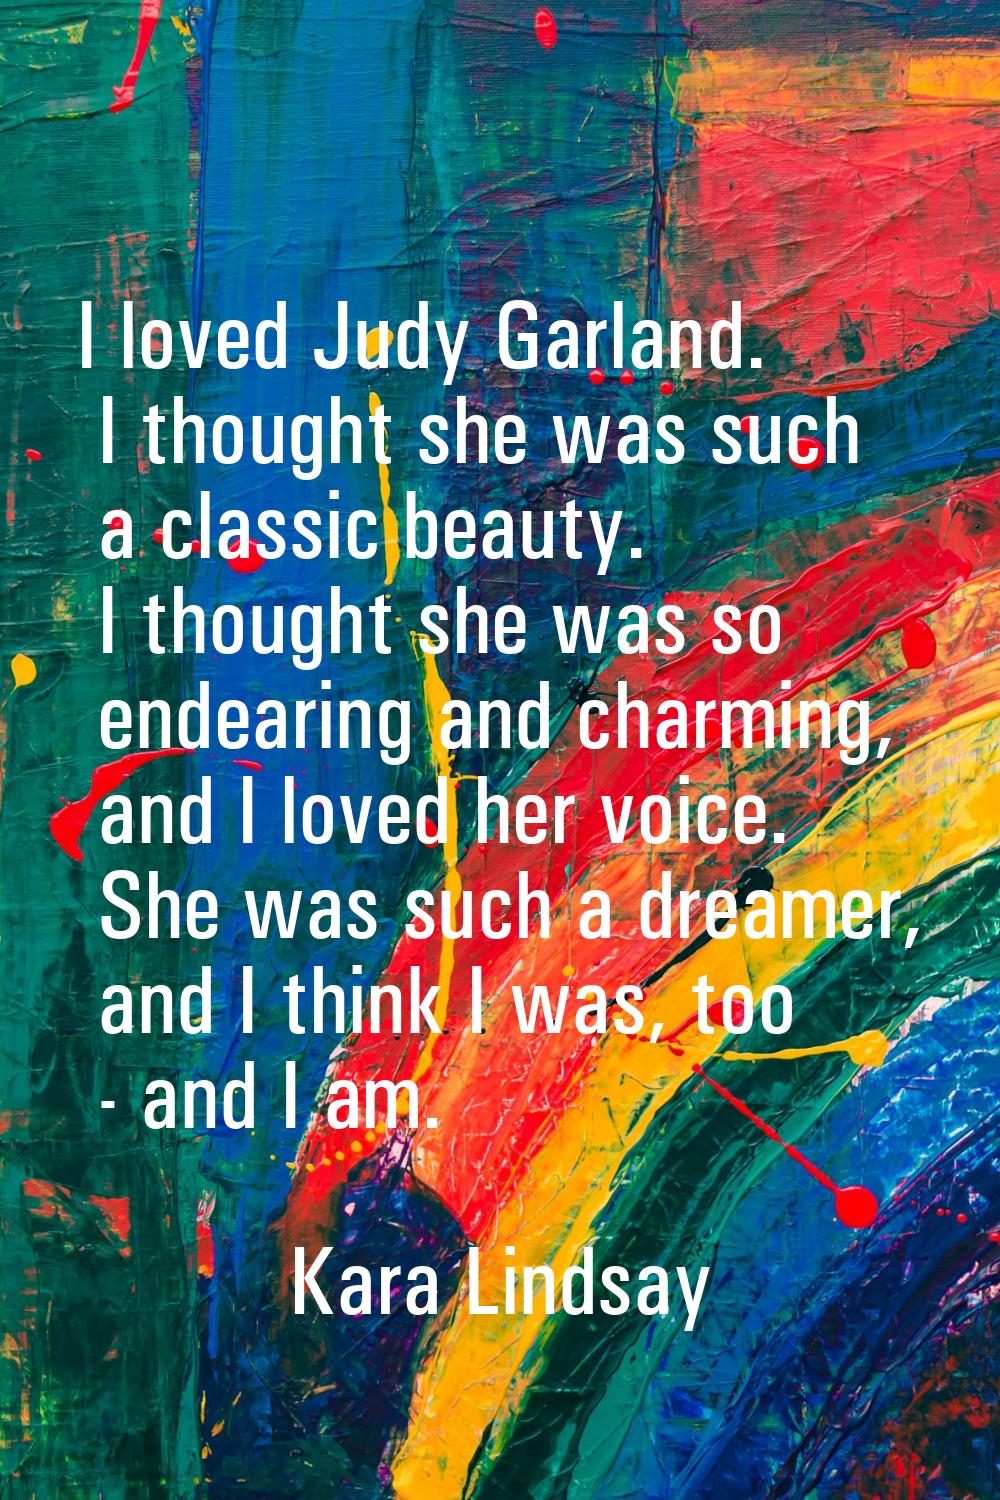 I loved Judy Garland. I thought she was such a classic beauty. I thought she was so endearing and c